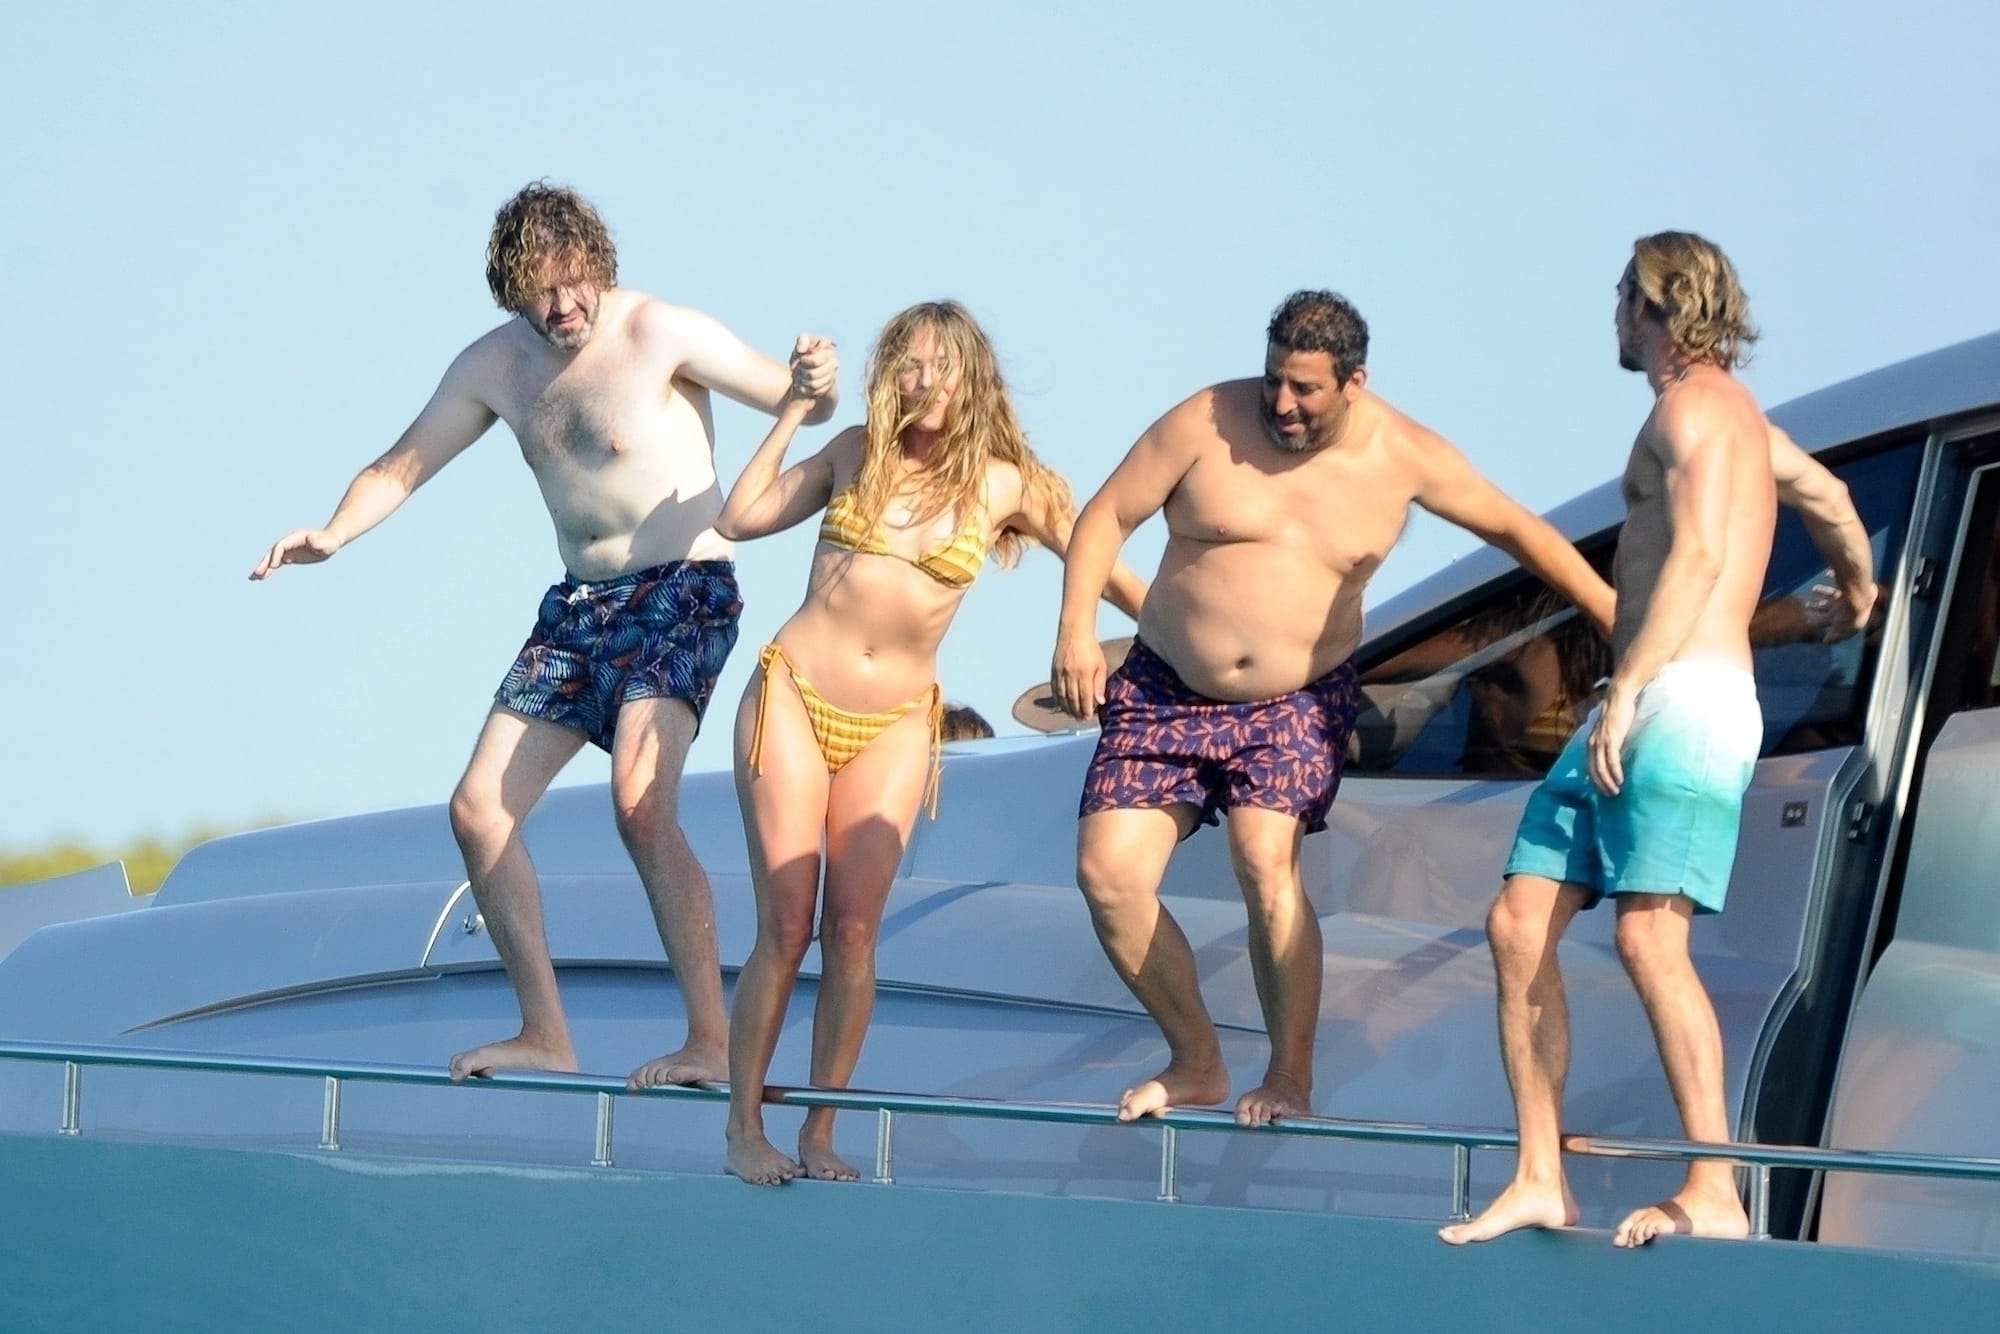 Margot and her husband jumping off the side of the boat along with some of their friends.